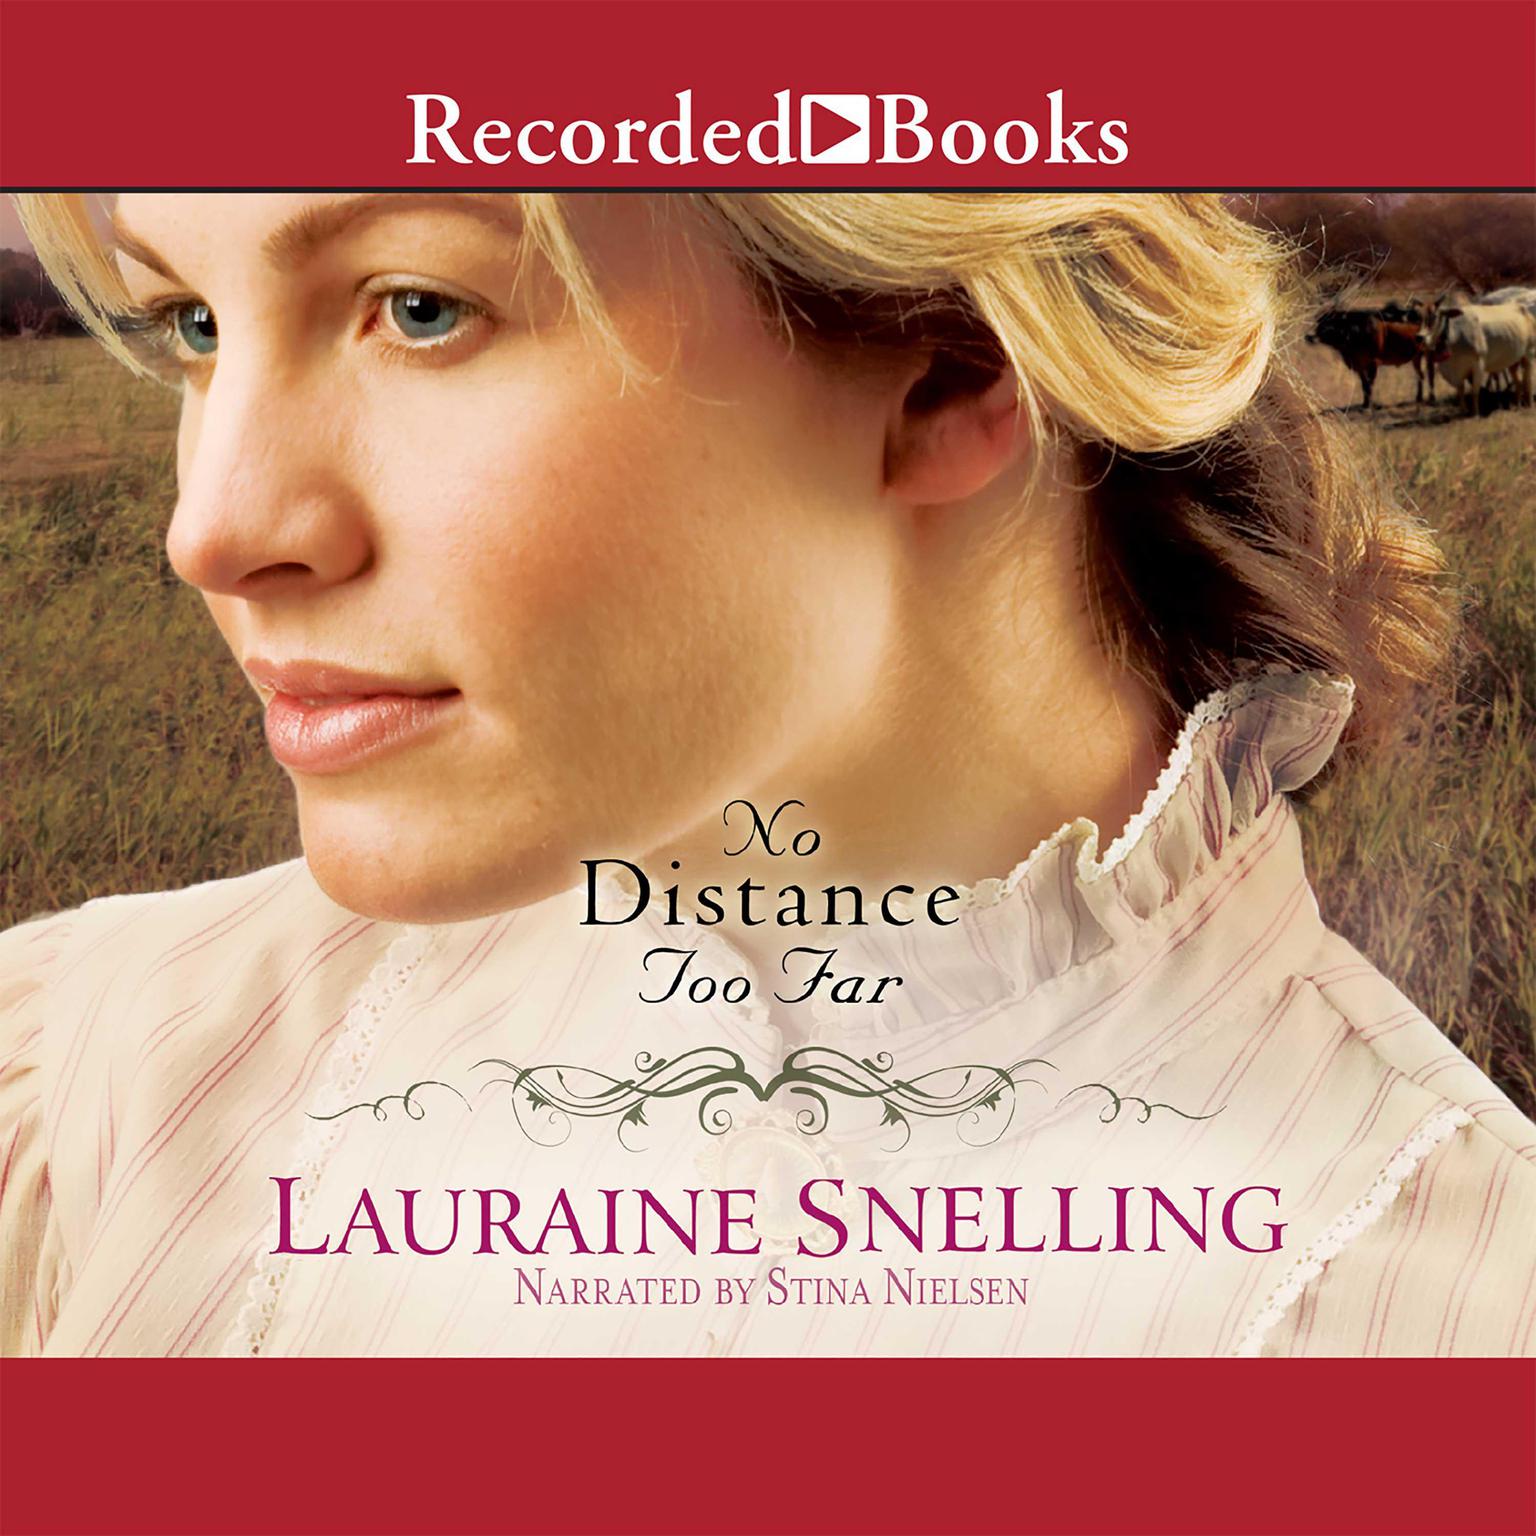 No Distance Too Far Audiobook, by Lauraine Snelling